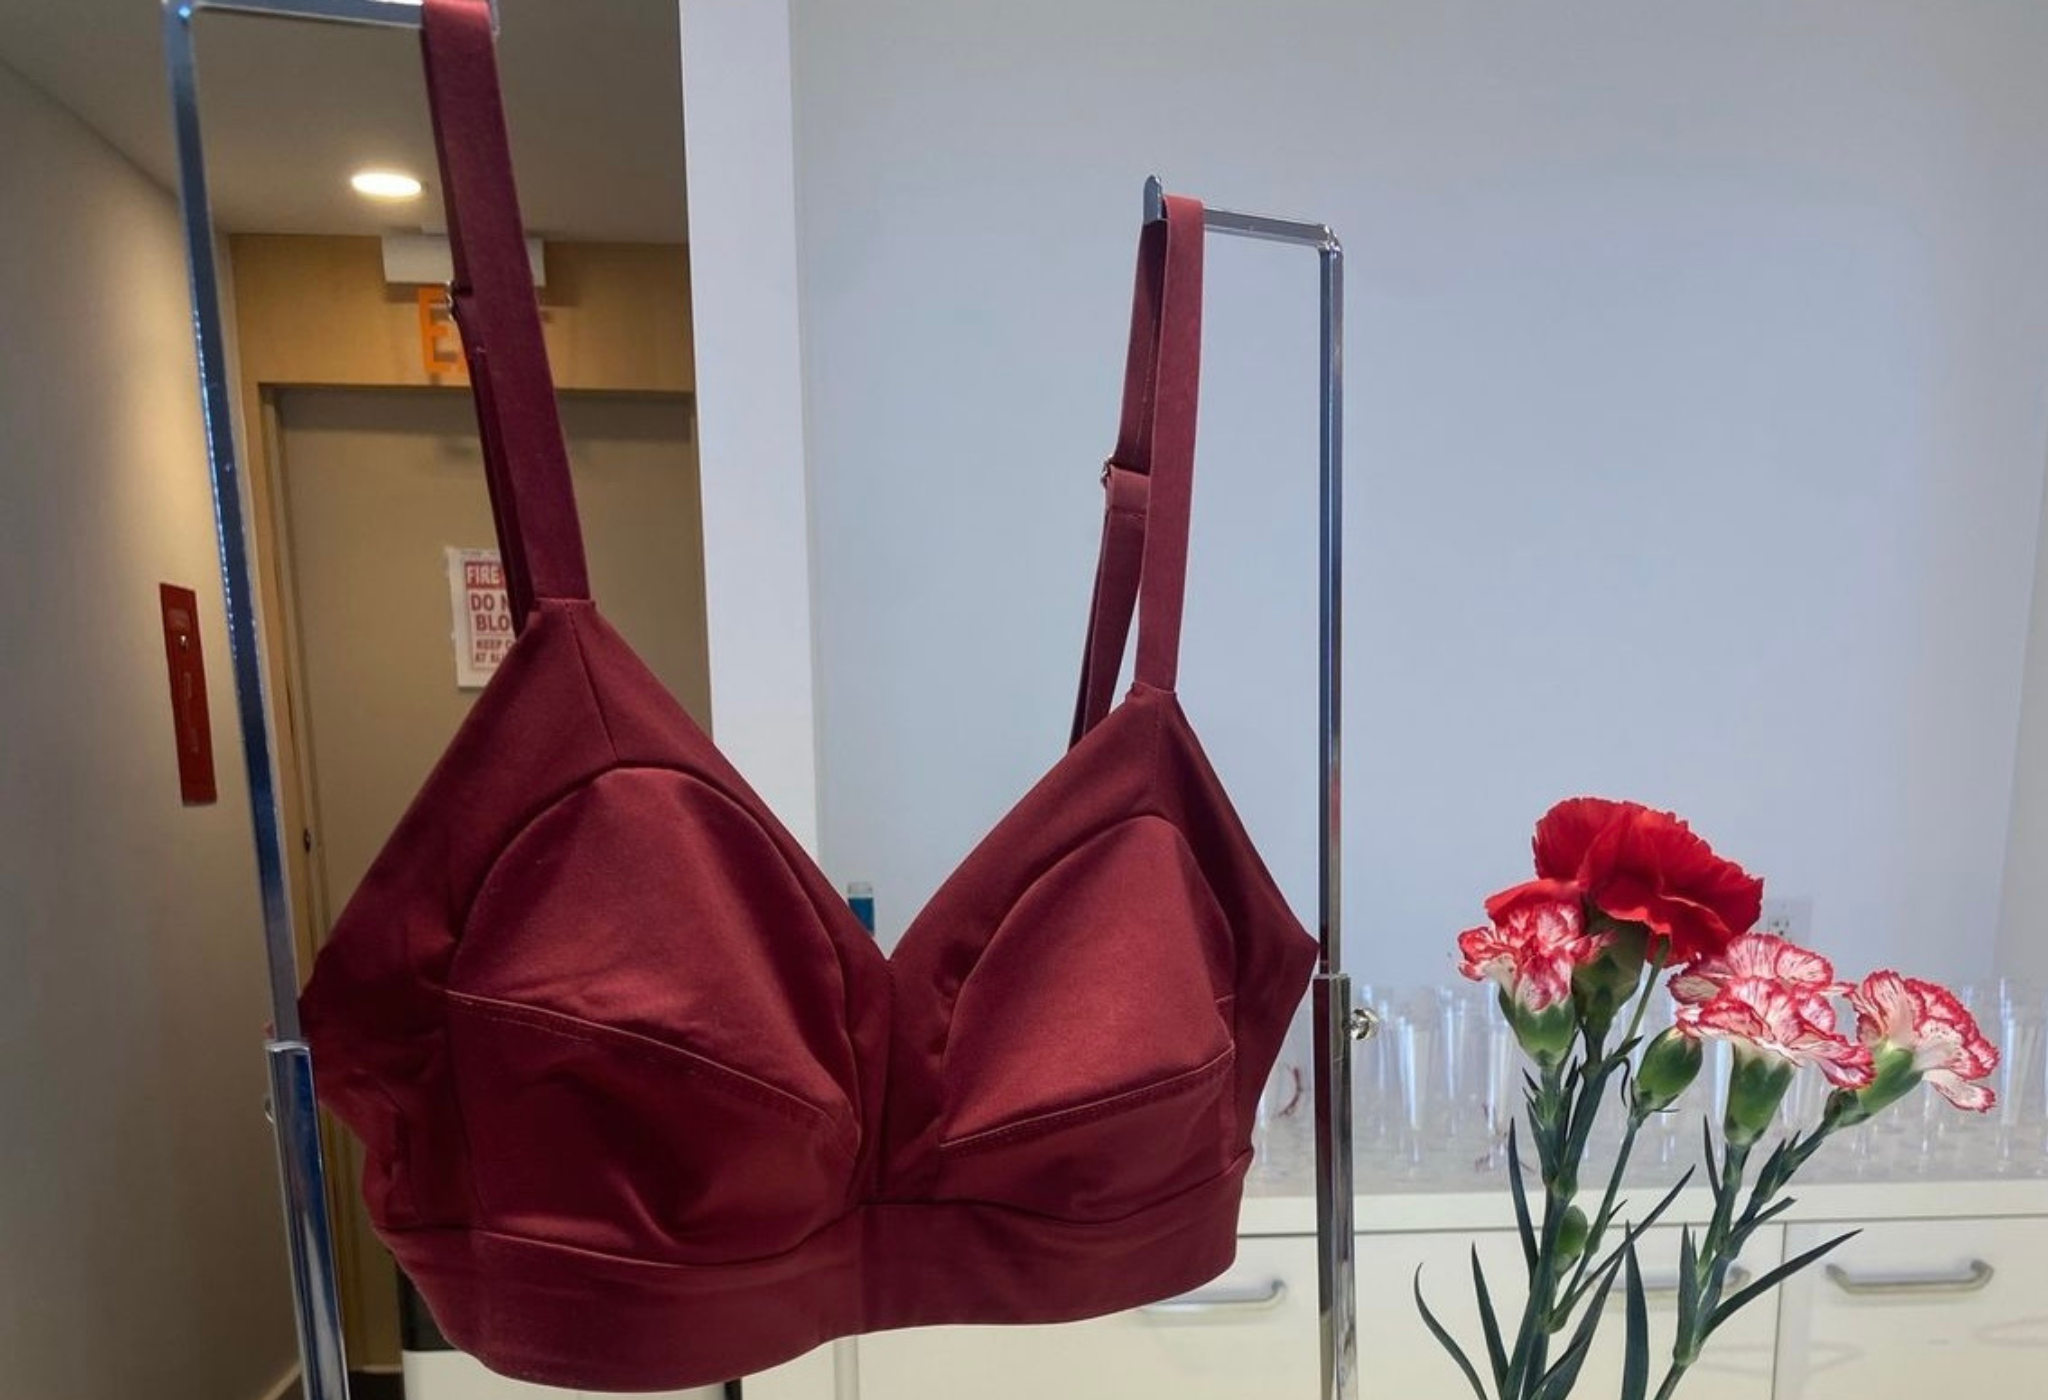 beautifully crafted DOUBL t shirt bra hanging